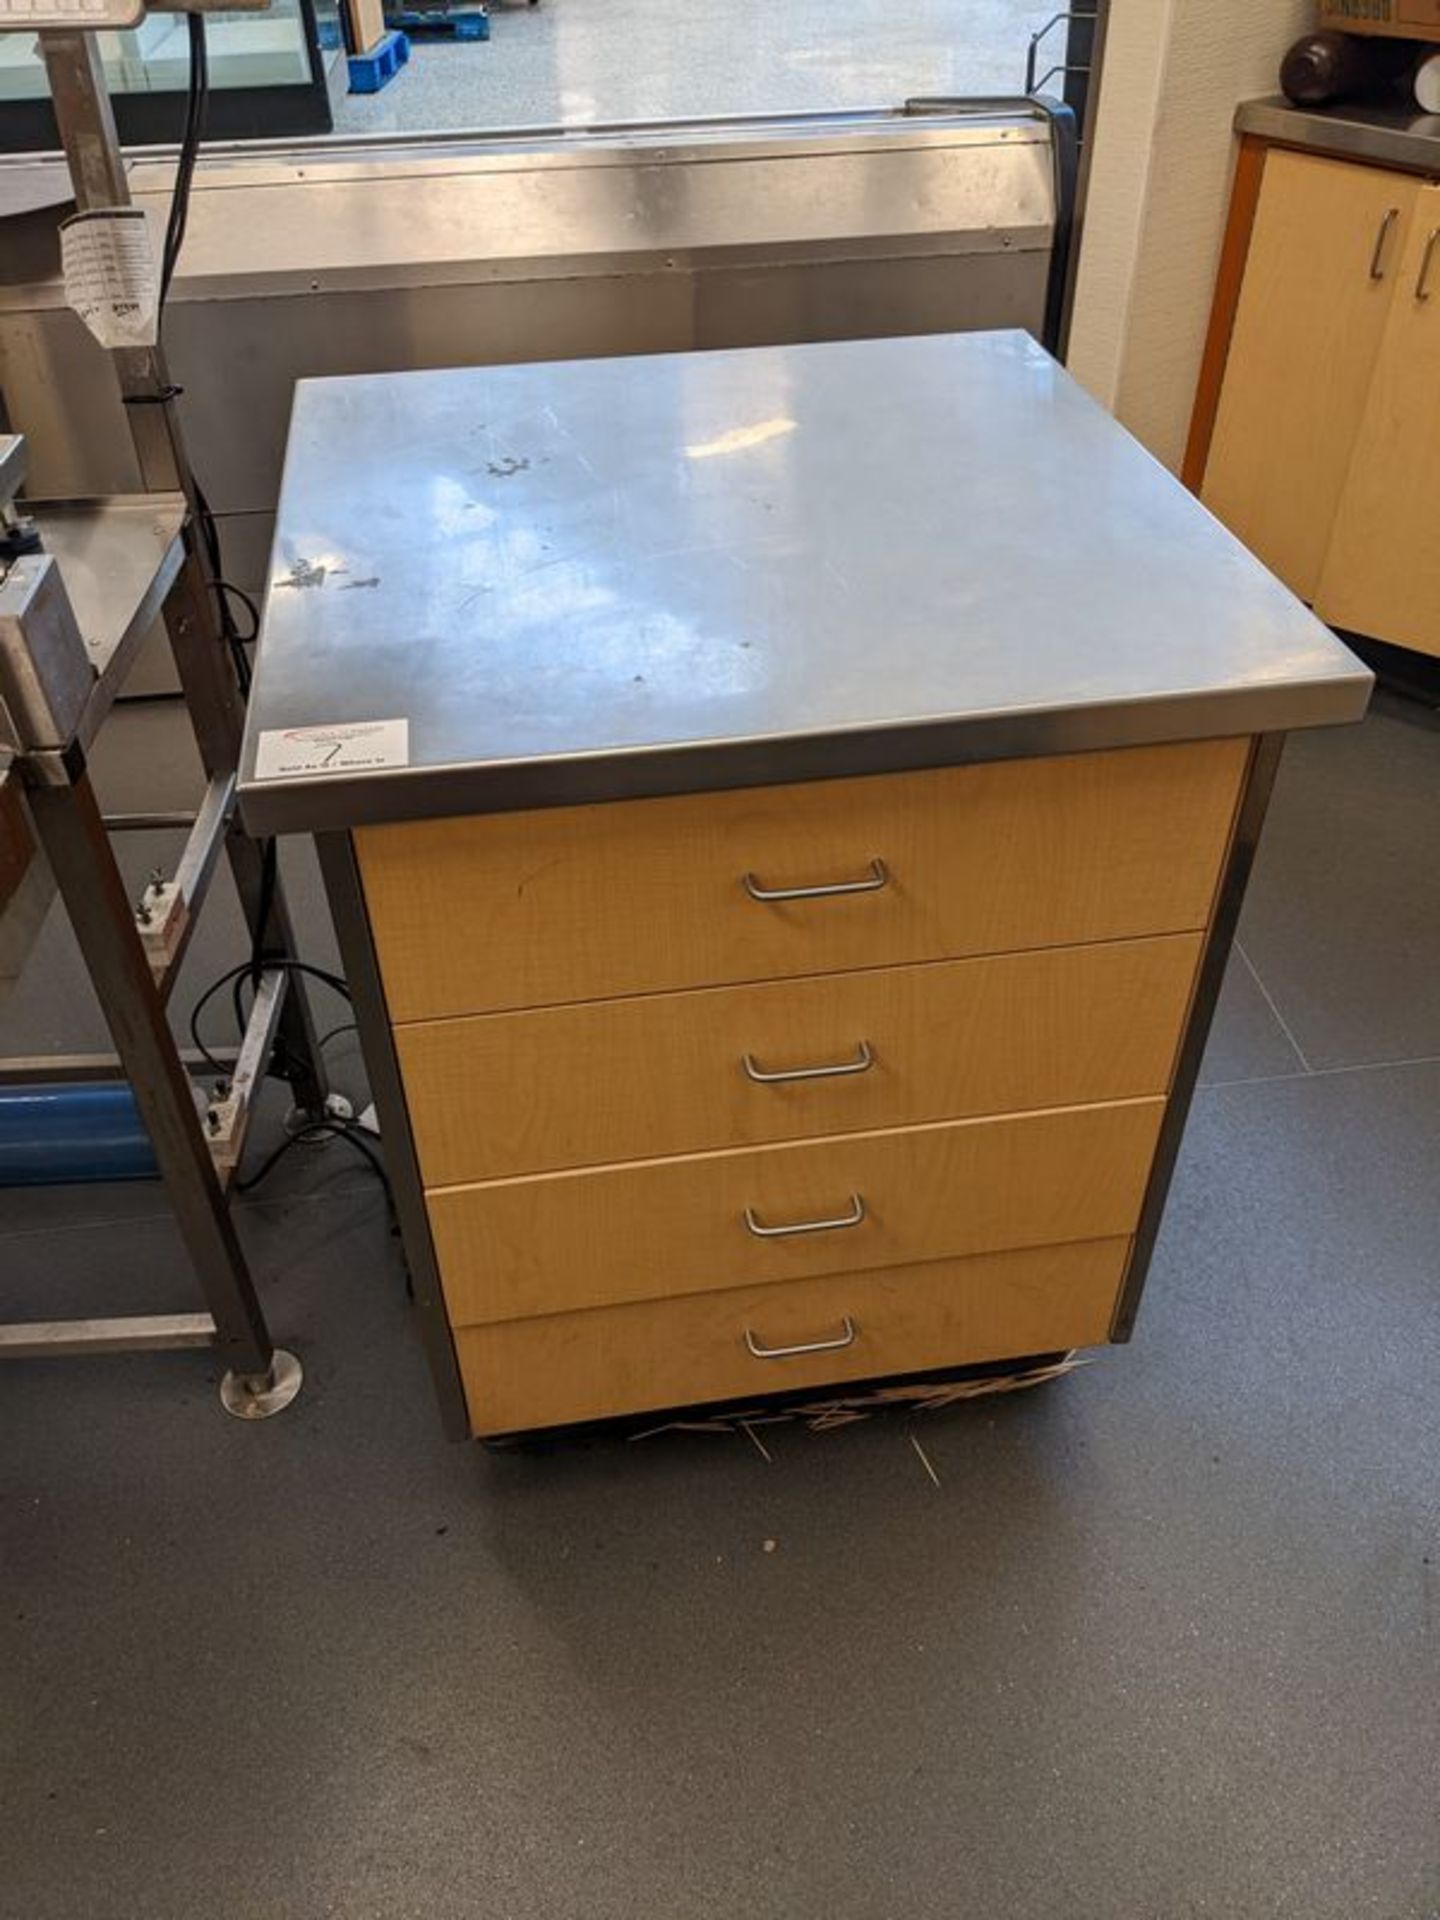 30 x 30" Stainless Steel Top 4 Drawer Table